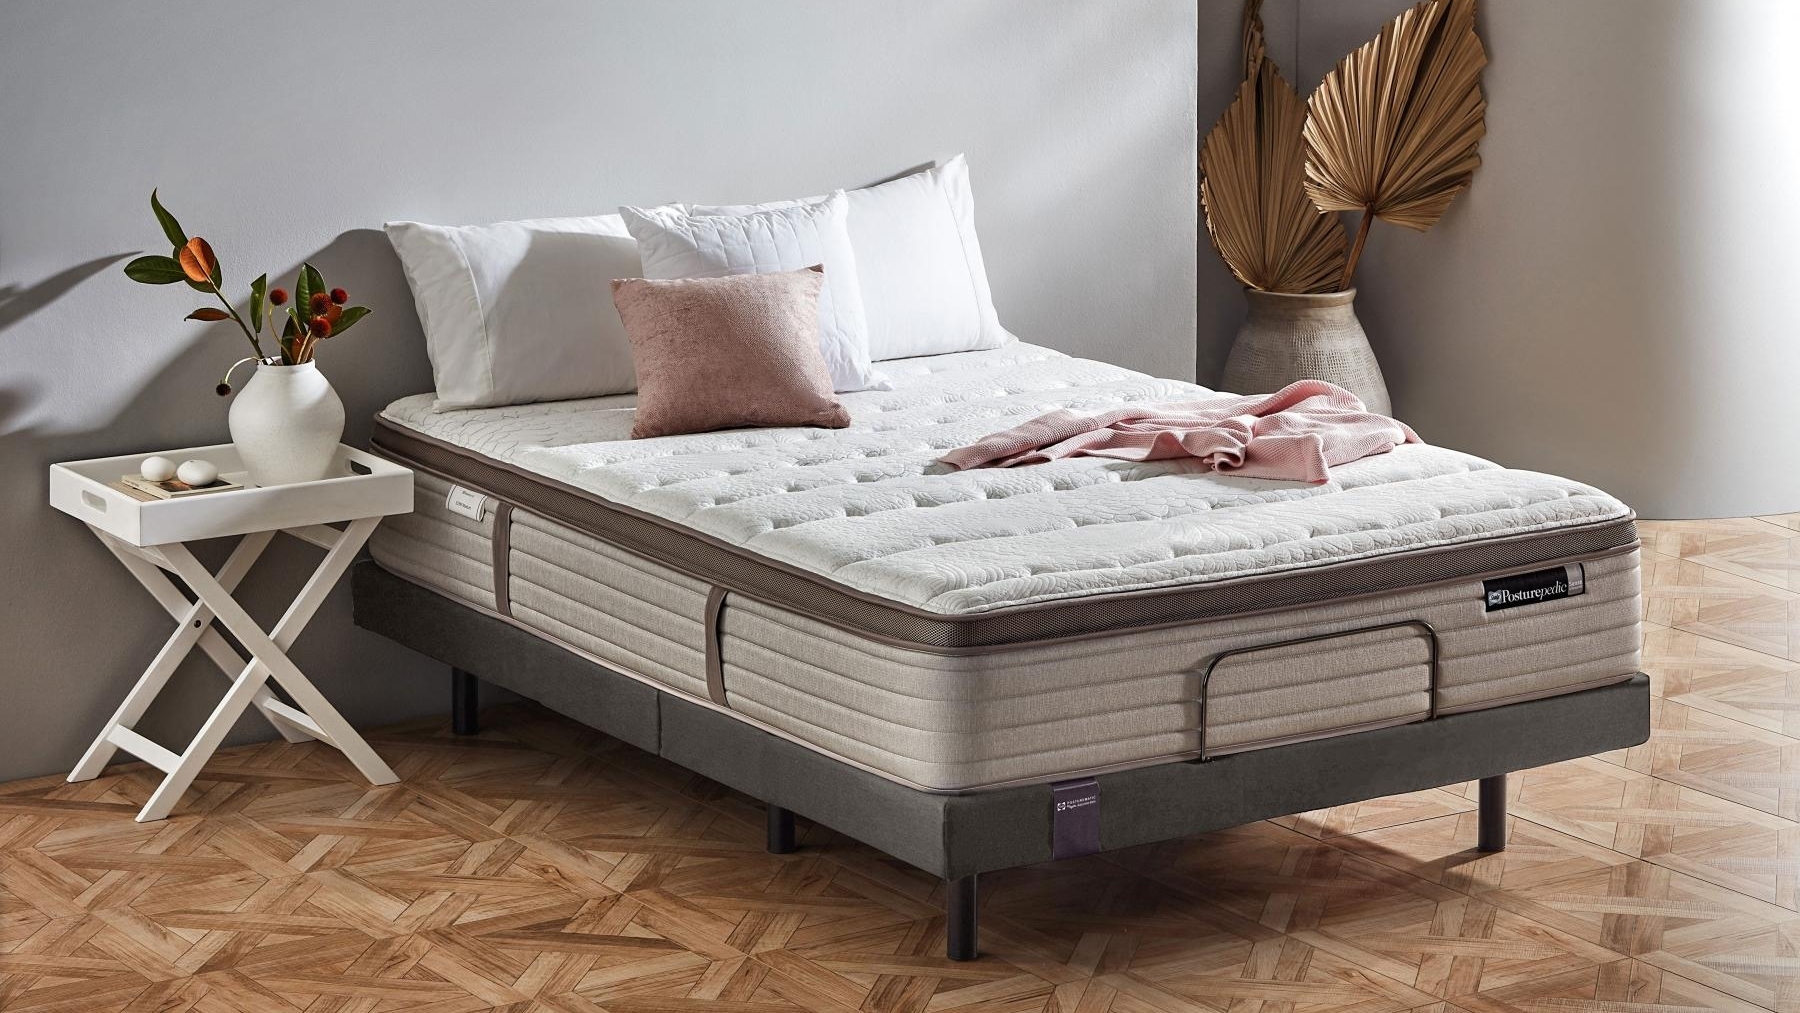 Sealy Posturematic Inspire, Sealy Adjustable Bed Frame